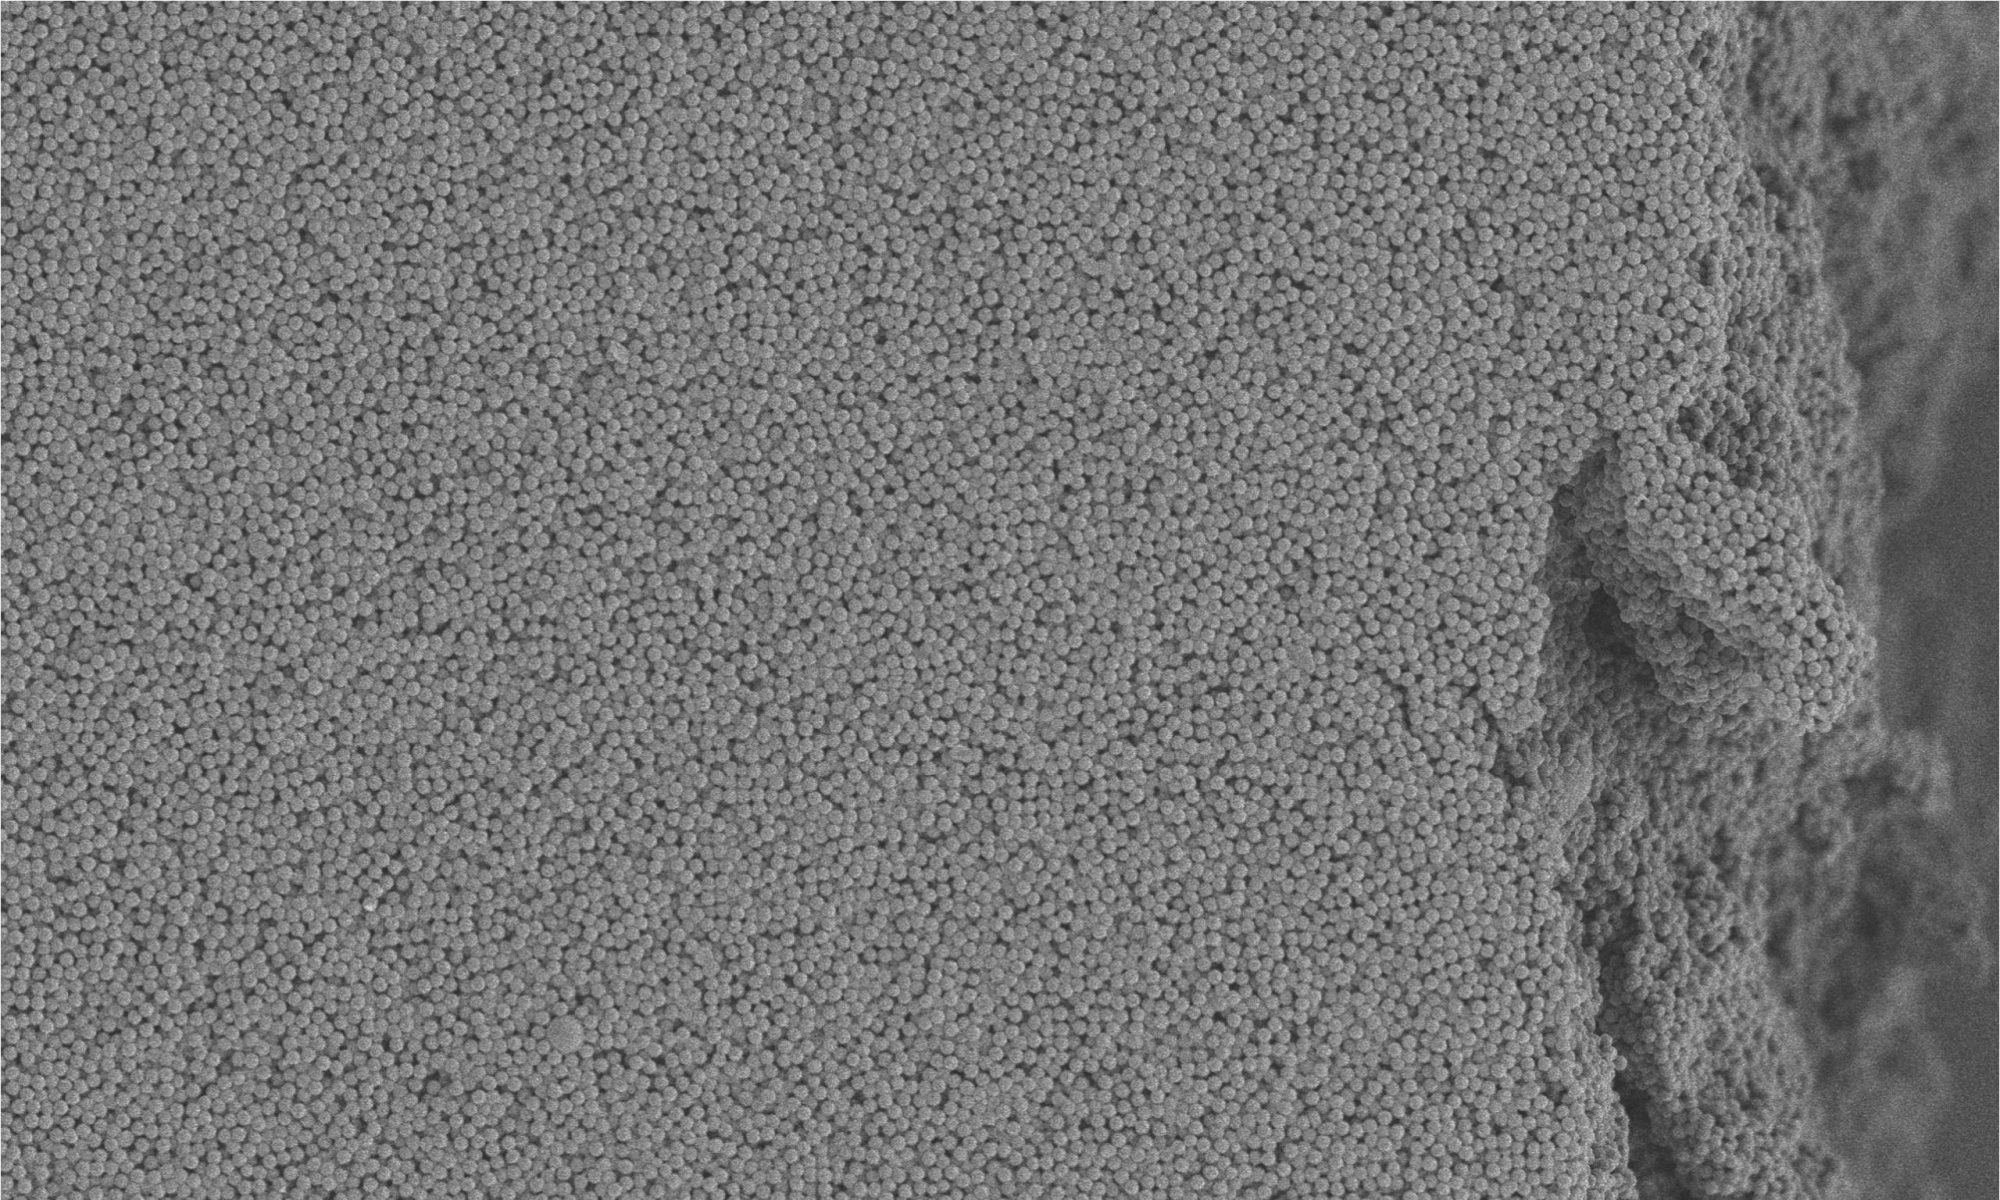 cropped SEM PS nanoparticles scaled 1